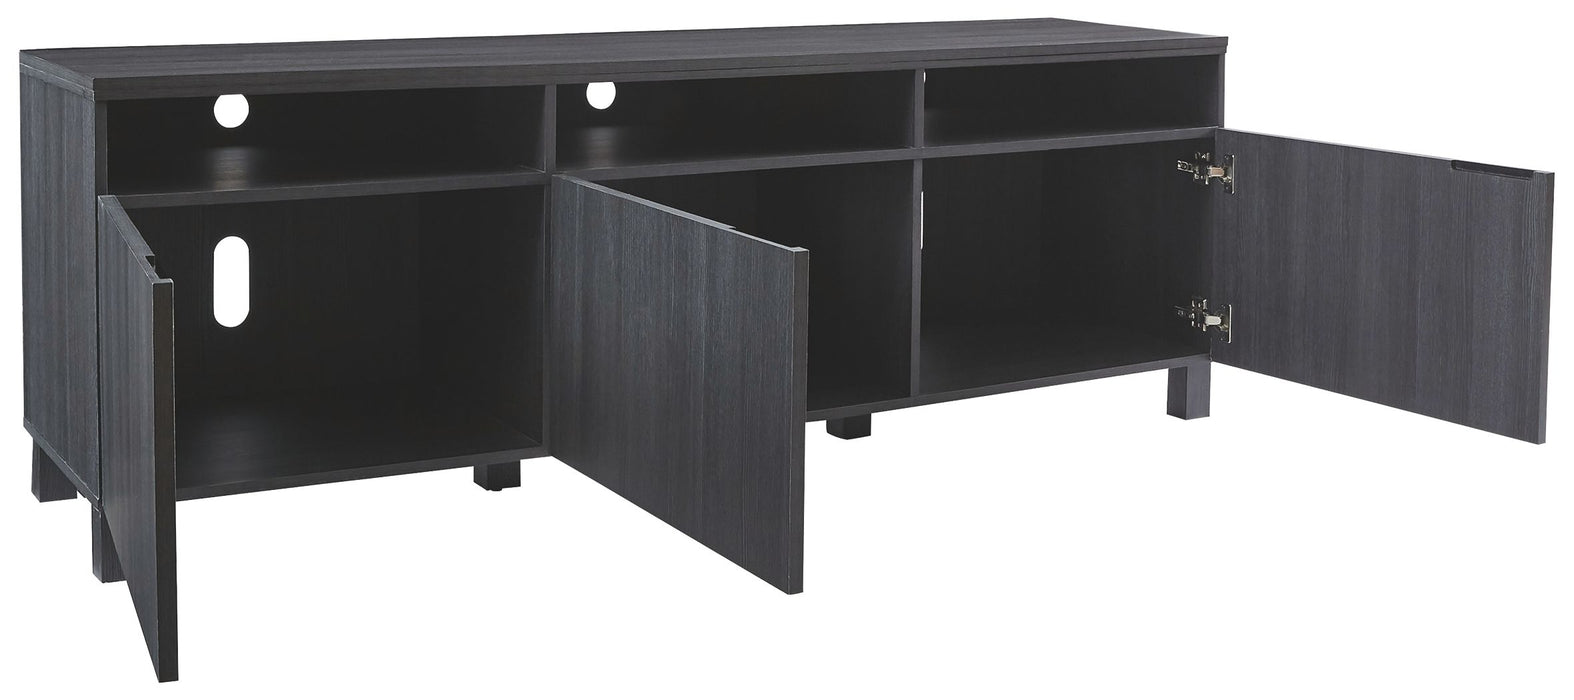 Yarlow - Black - Extra Large TV Stand Unique Piece Furniture